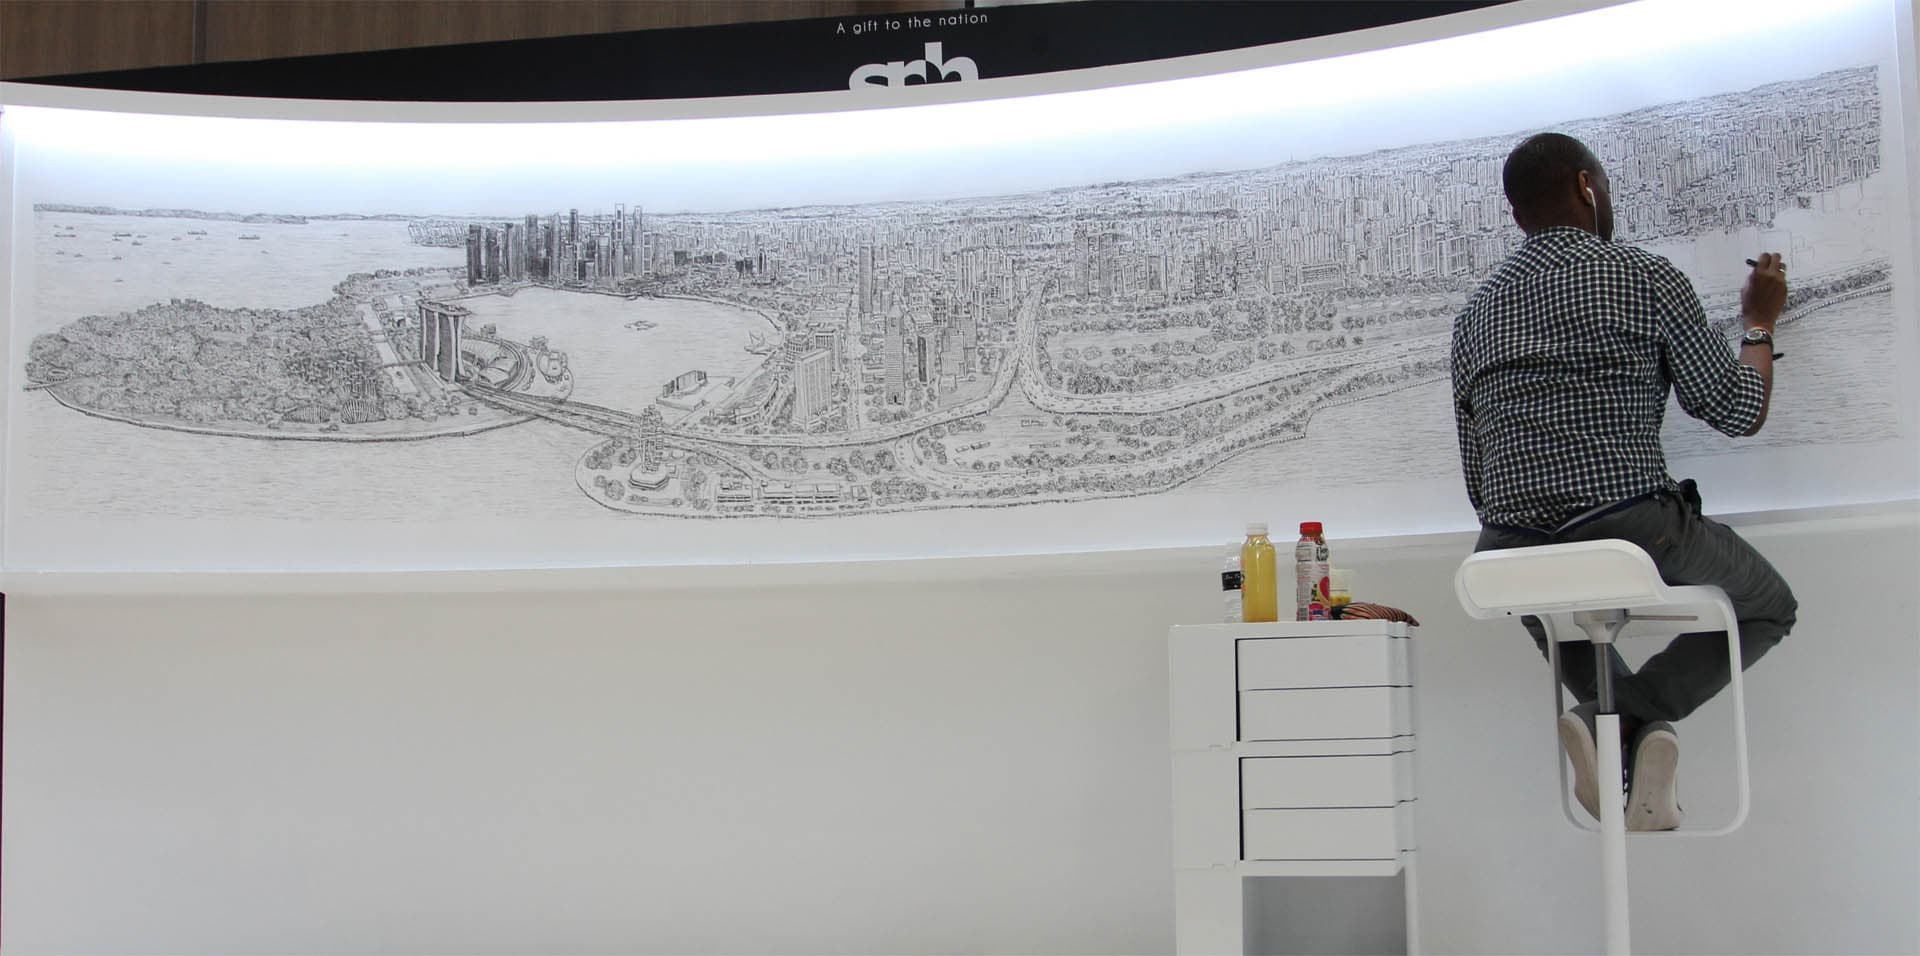 Stephen Wiltshire's City Panorama drawings